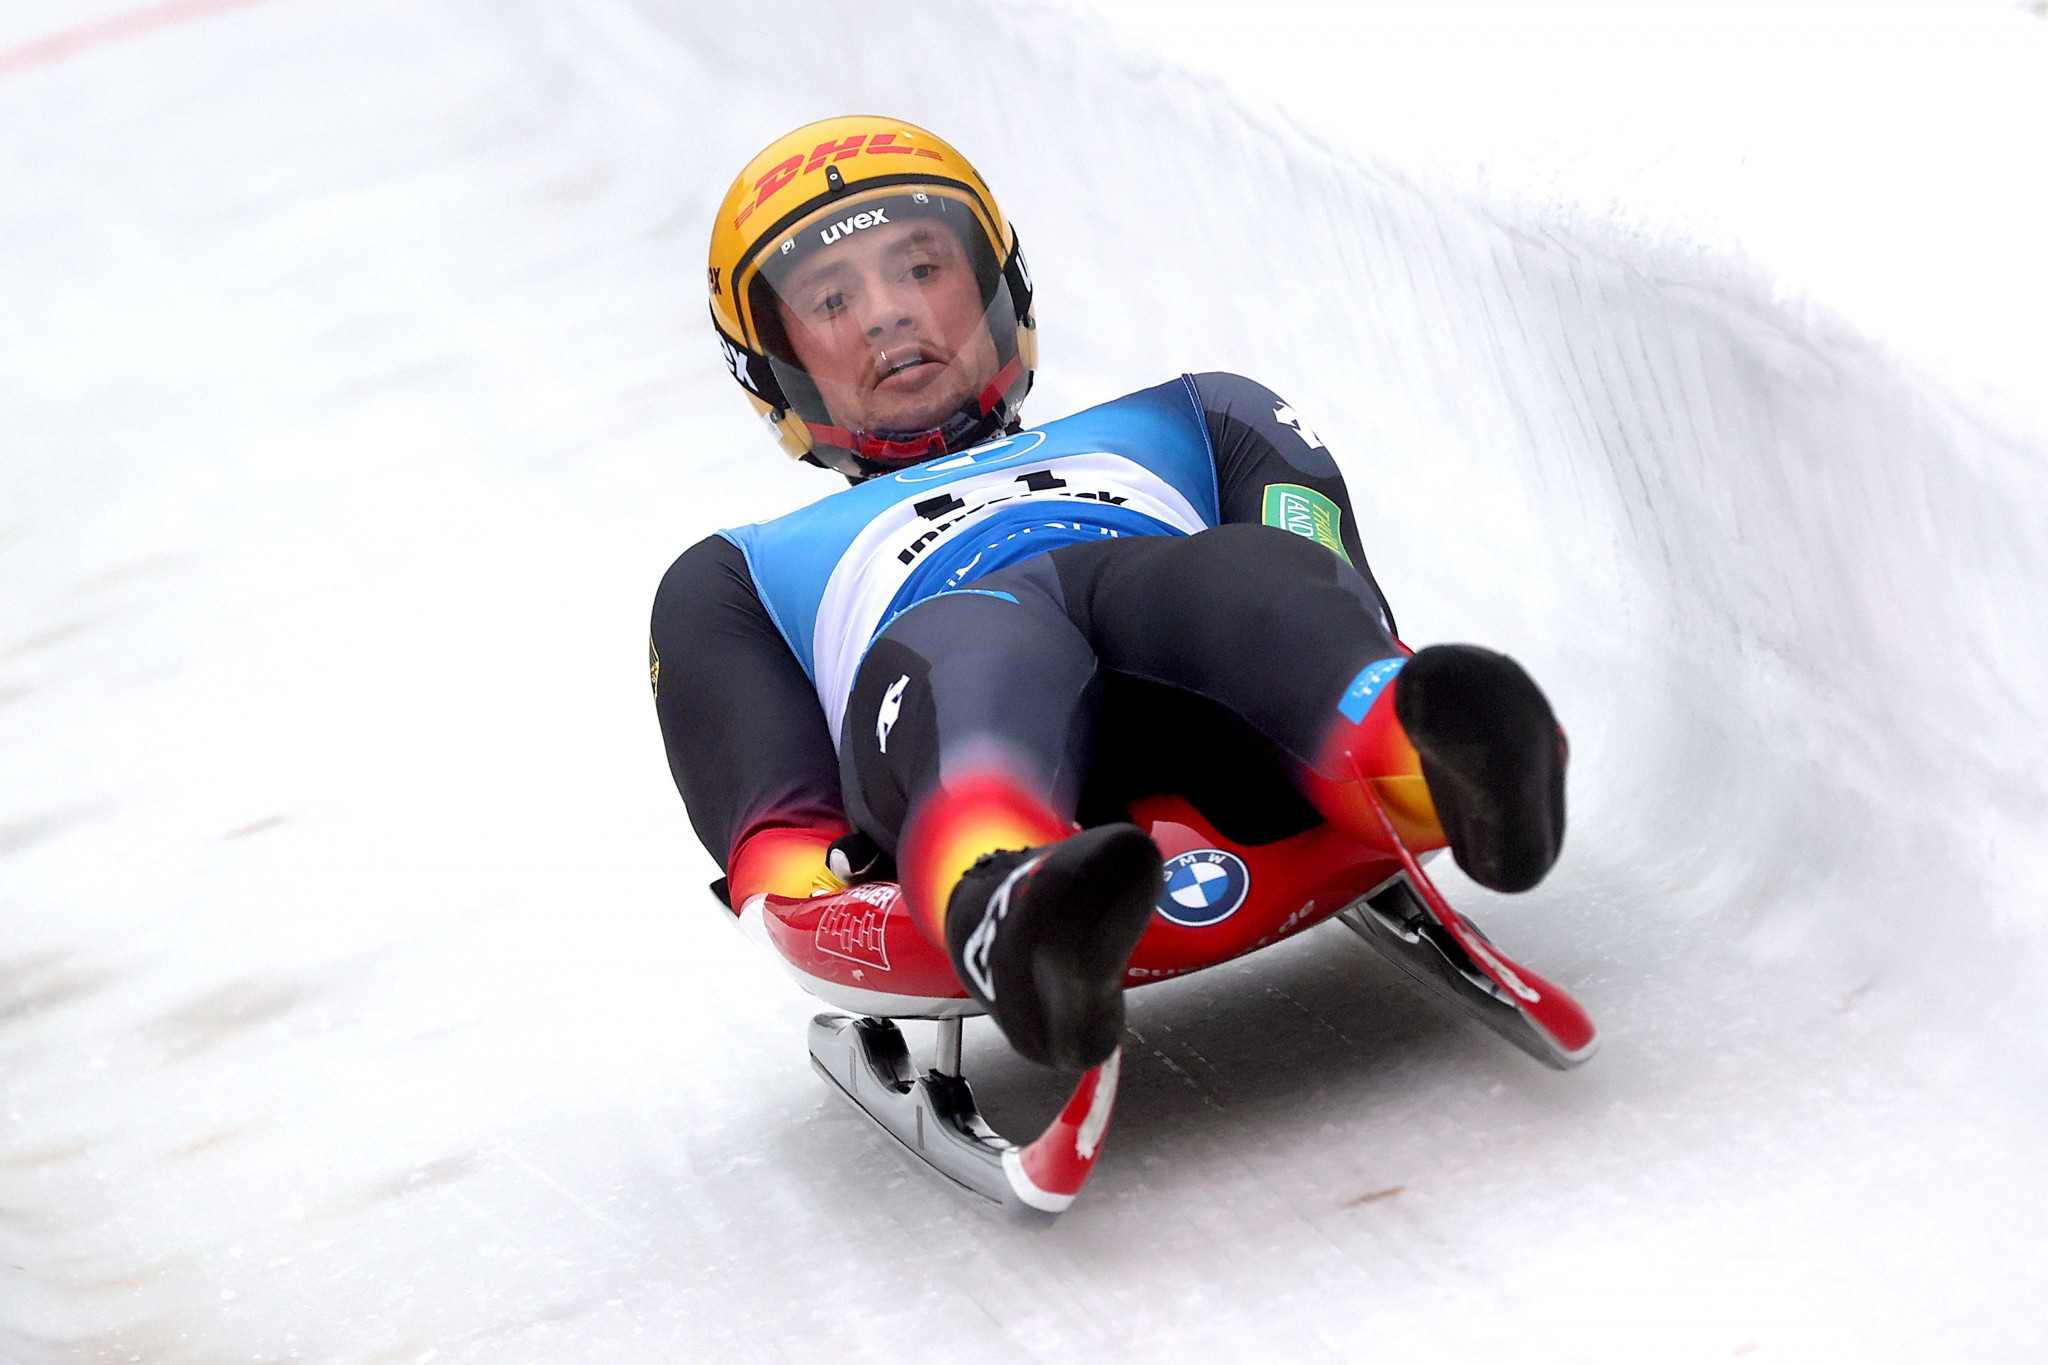 Ludwig and Taubitz looking to capitalise on home Luge World Cup in penultimate event